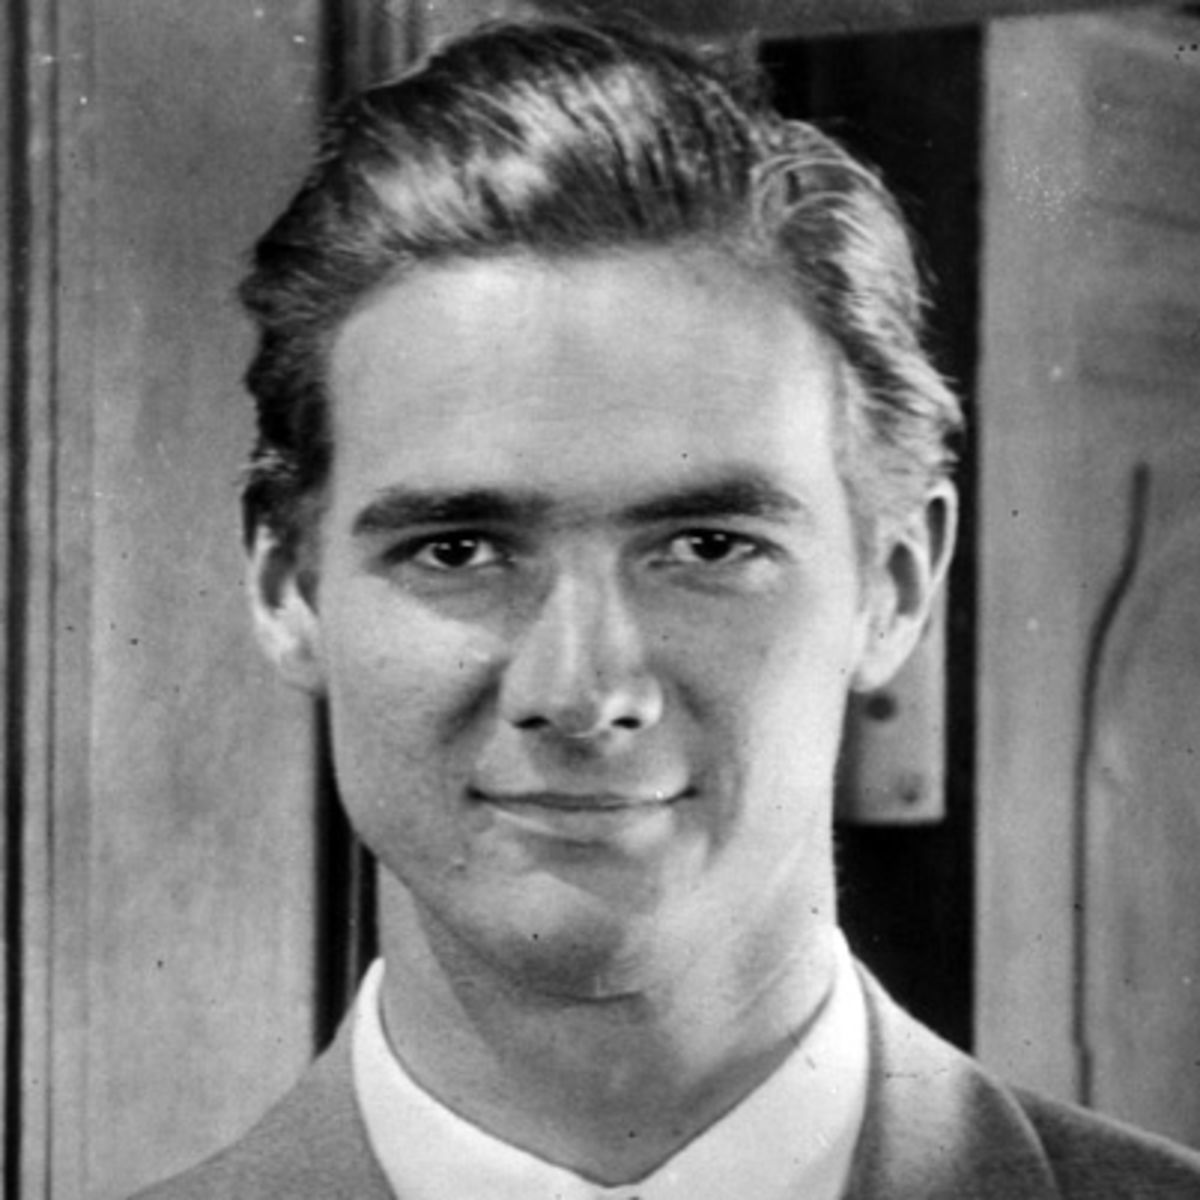 Howard Hughes bought an entire casino just so he could tear down their 

neon sign. Visible from Hughes' bedroom, it apparently had kept him up 

at night.